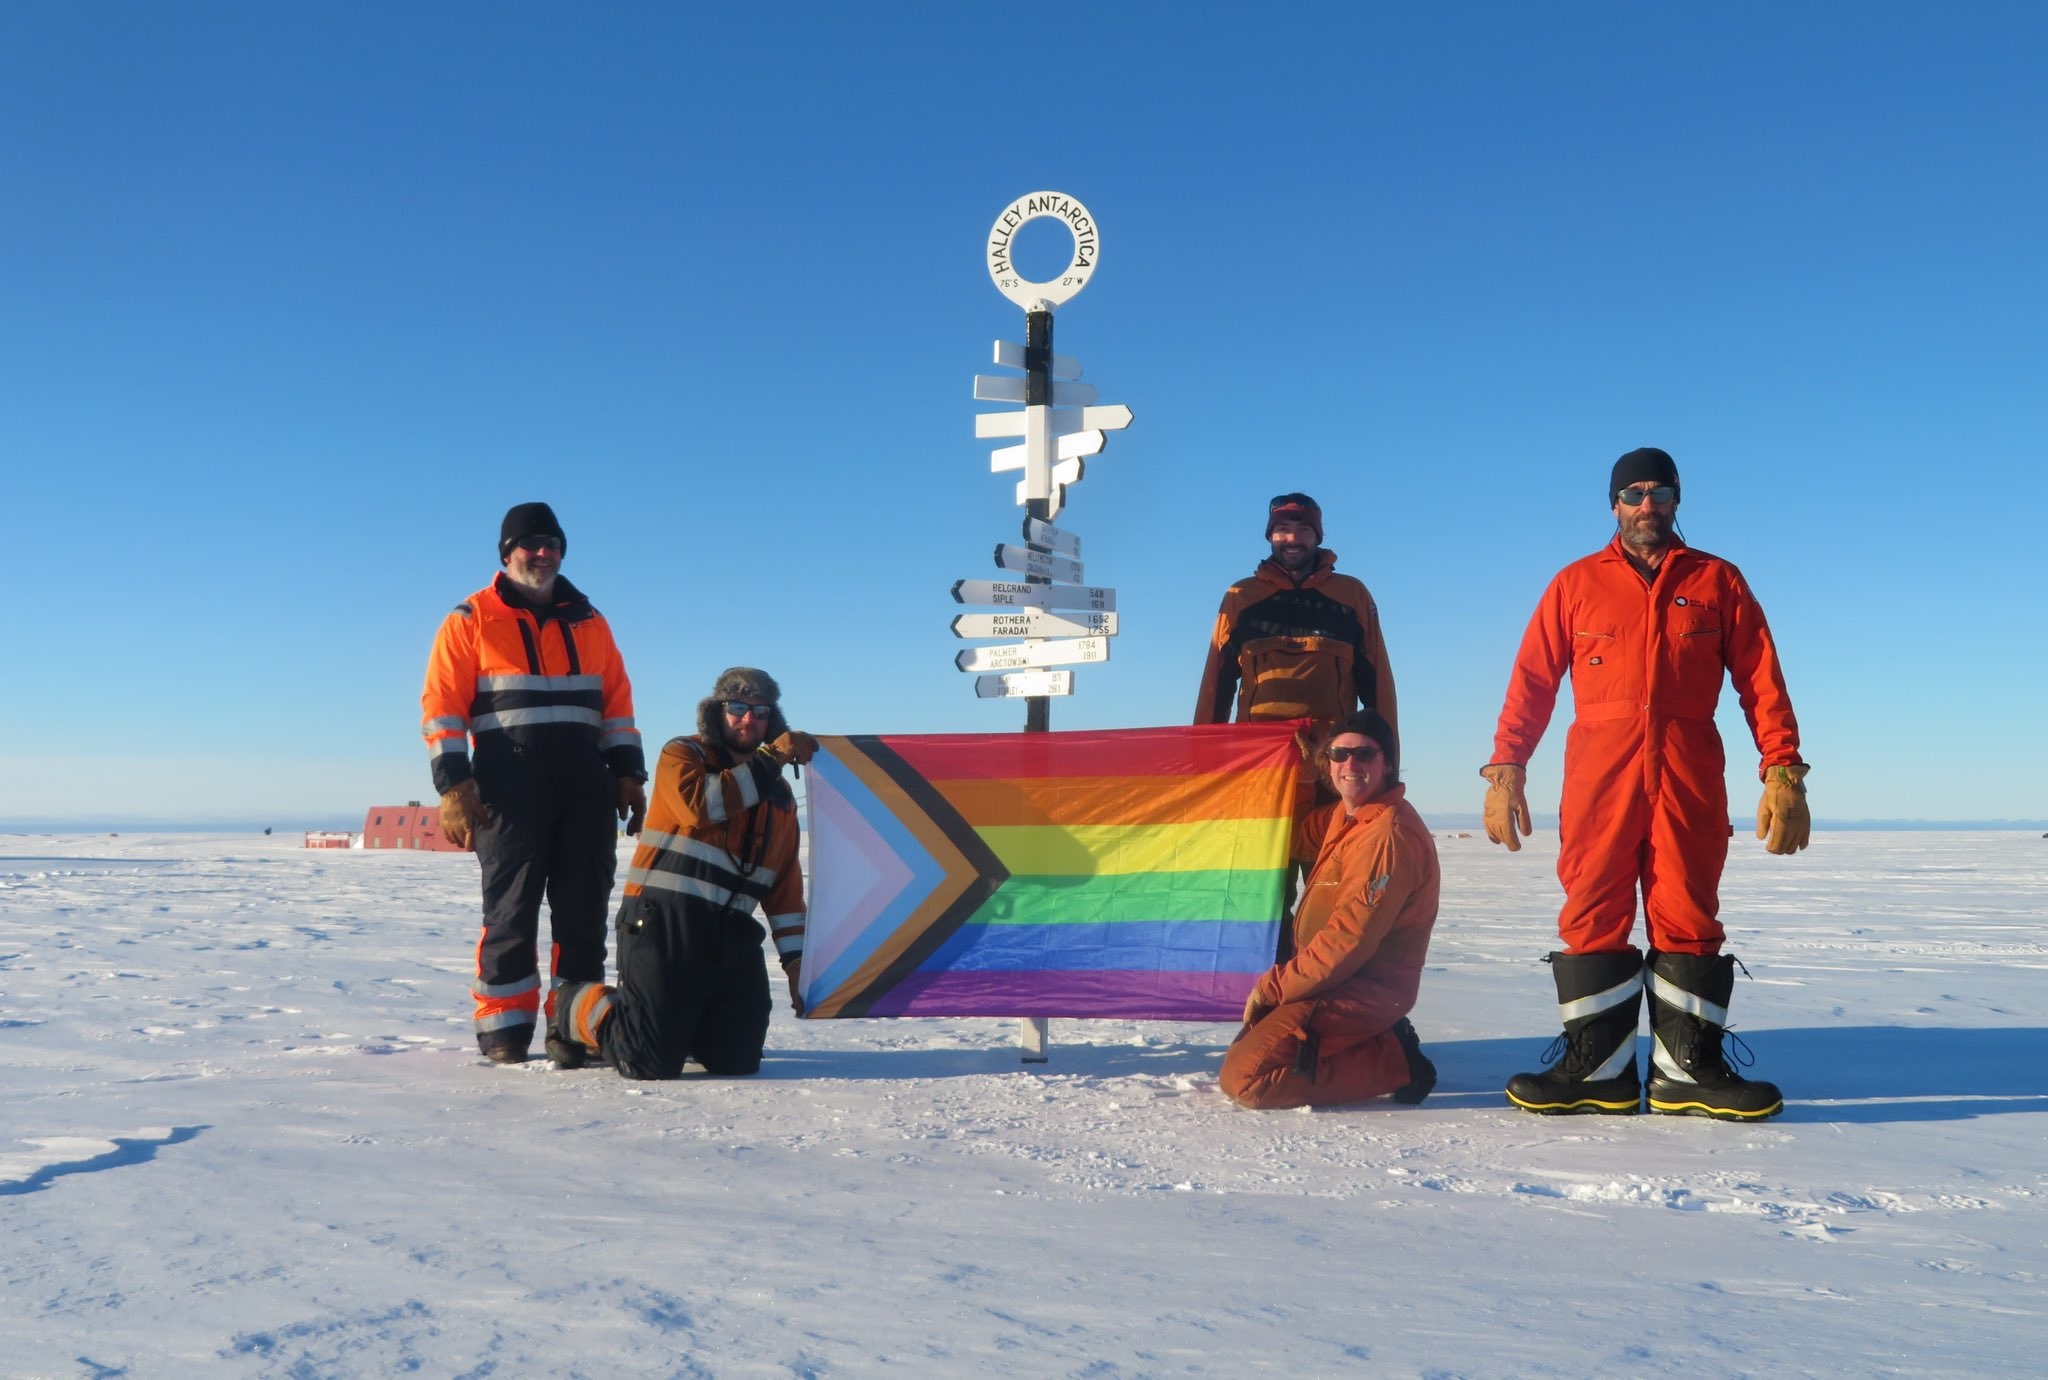 The team at Halley VI with the Pride Flag